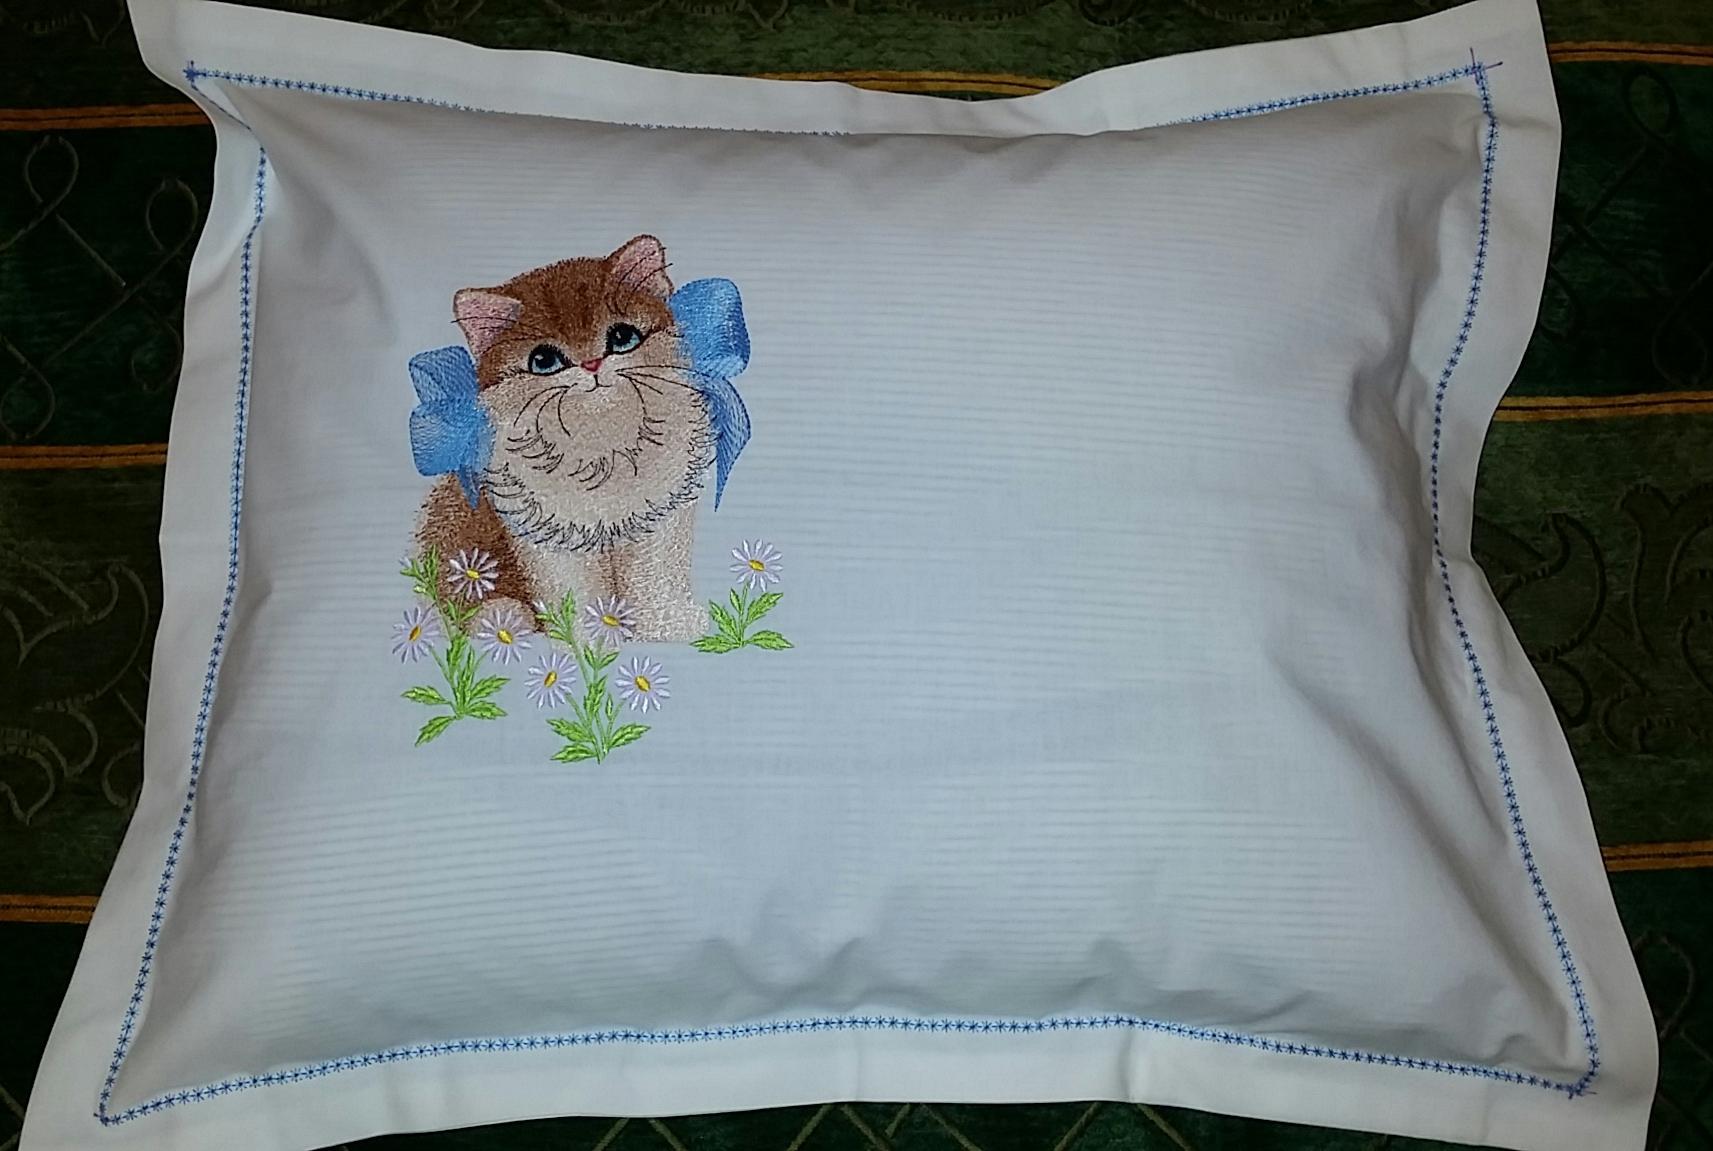 Embroidered pillow with kitty and bow design